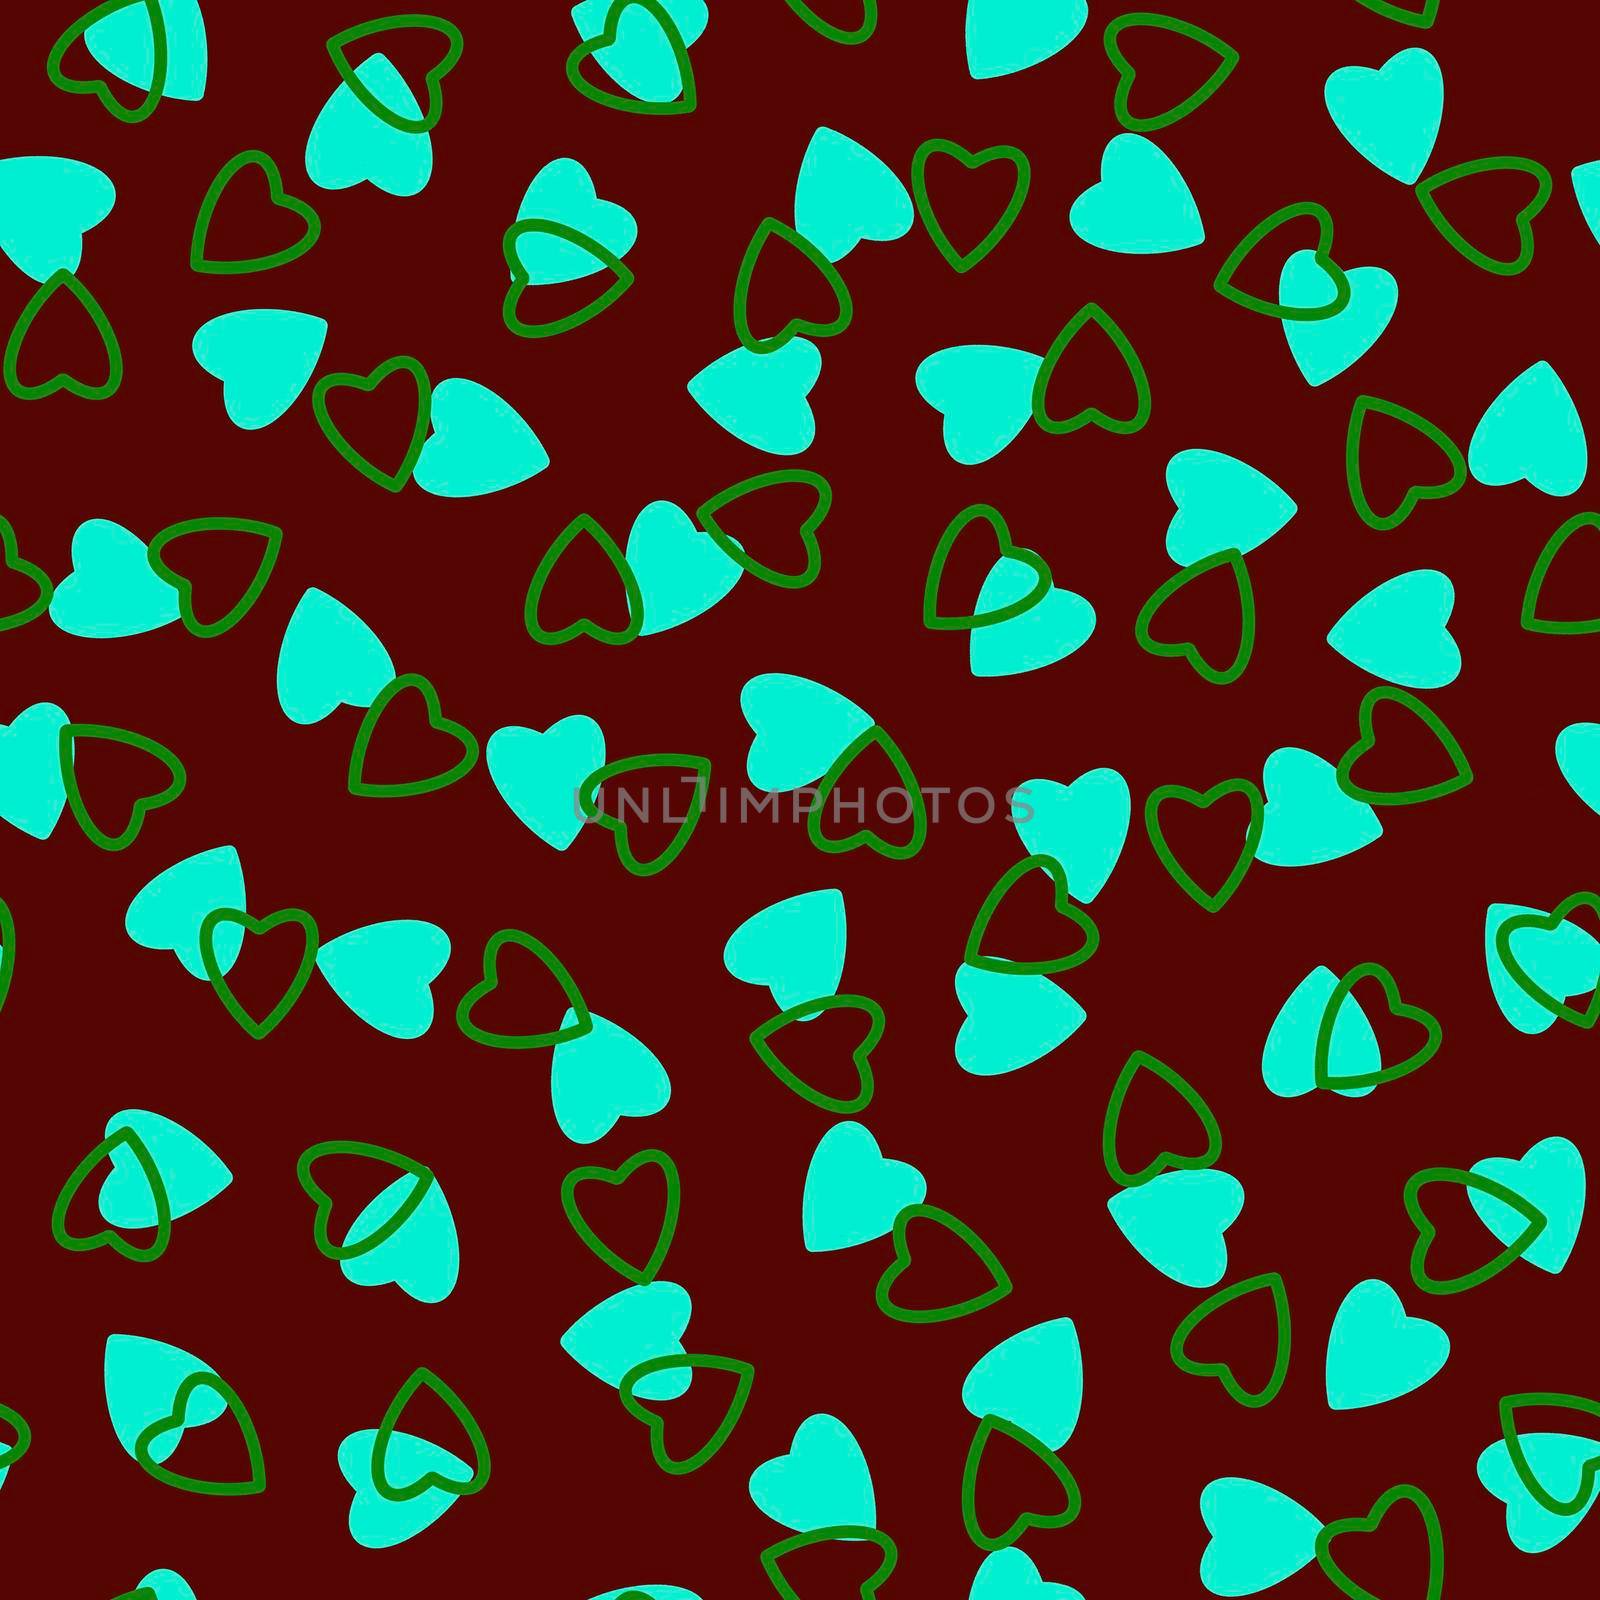 Simple heart seamless pattern,endless chaotic texture made tiny heart silhouettes.Valentines,mothers day background.Azure,green,burgundy.Great for Easter,wedding,scrapbook,gift wrapping paper,textiles